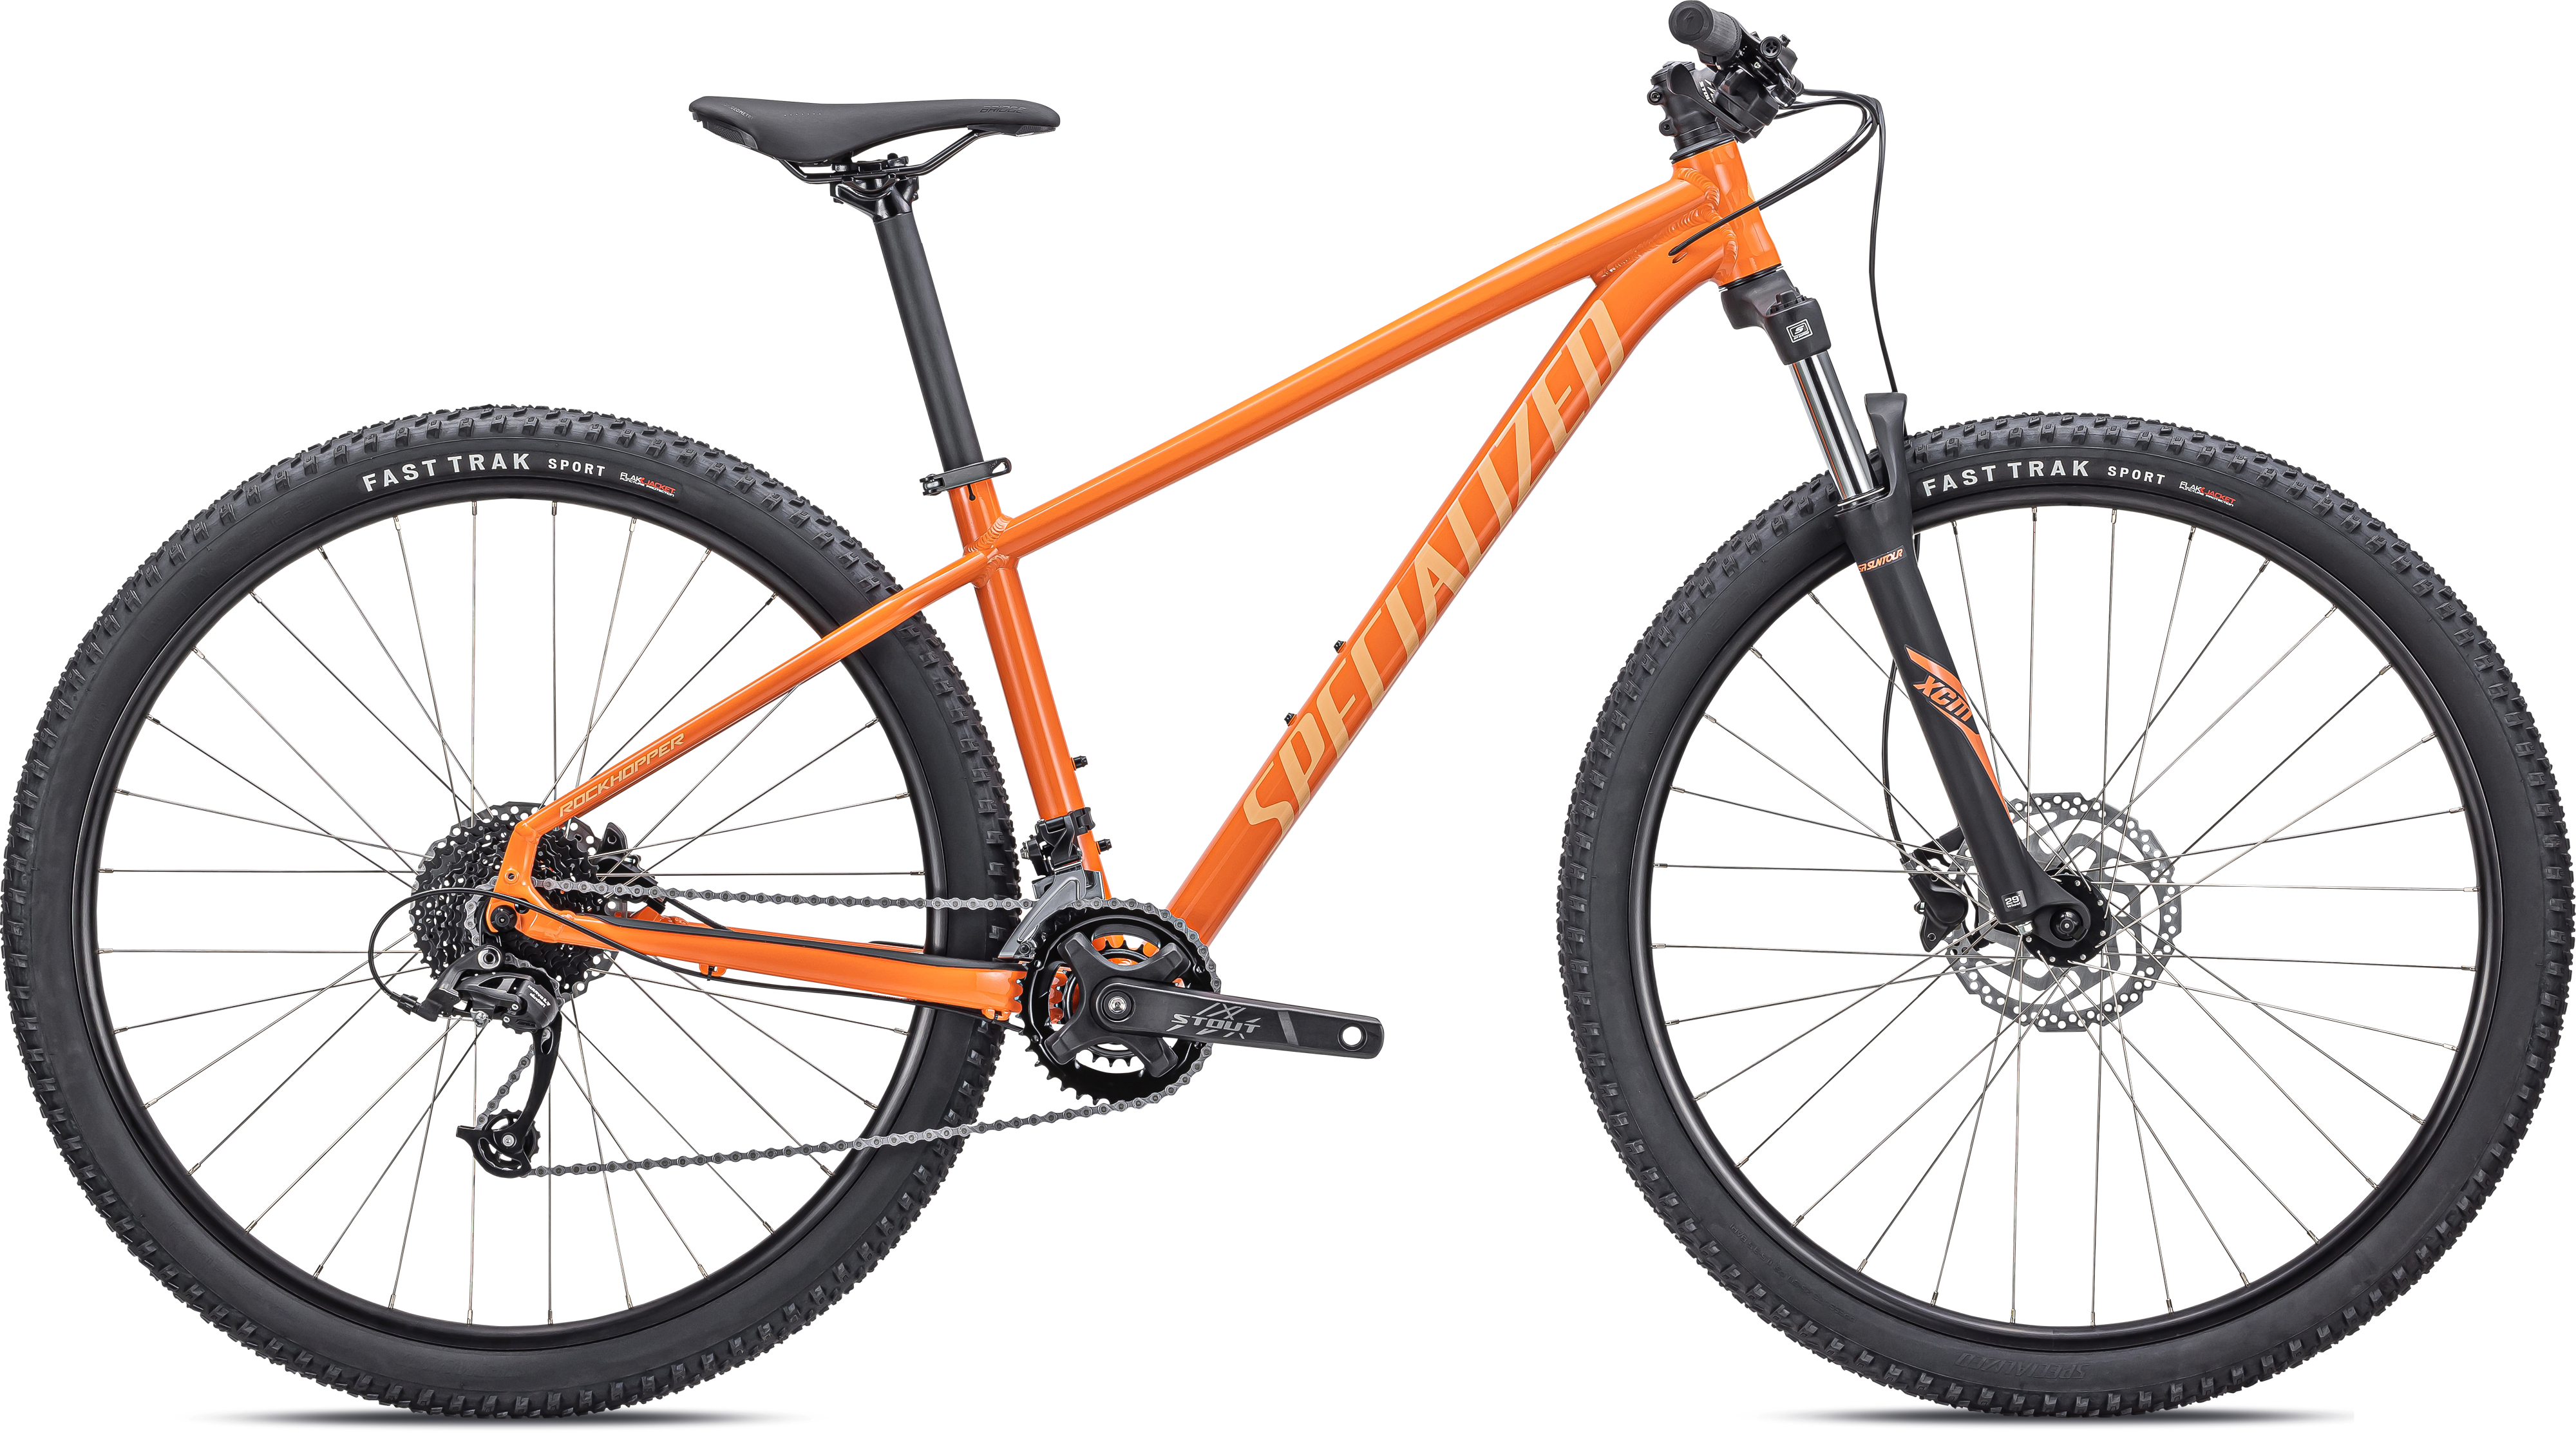 tOfficial mountain bike and granola thread - Page 2 91822-64_ROCKHOPPER-SPORT-29-BLZ-ICEPPYA_HERO?$scom-pdp-product-image$&fmt=auto